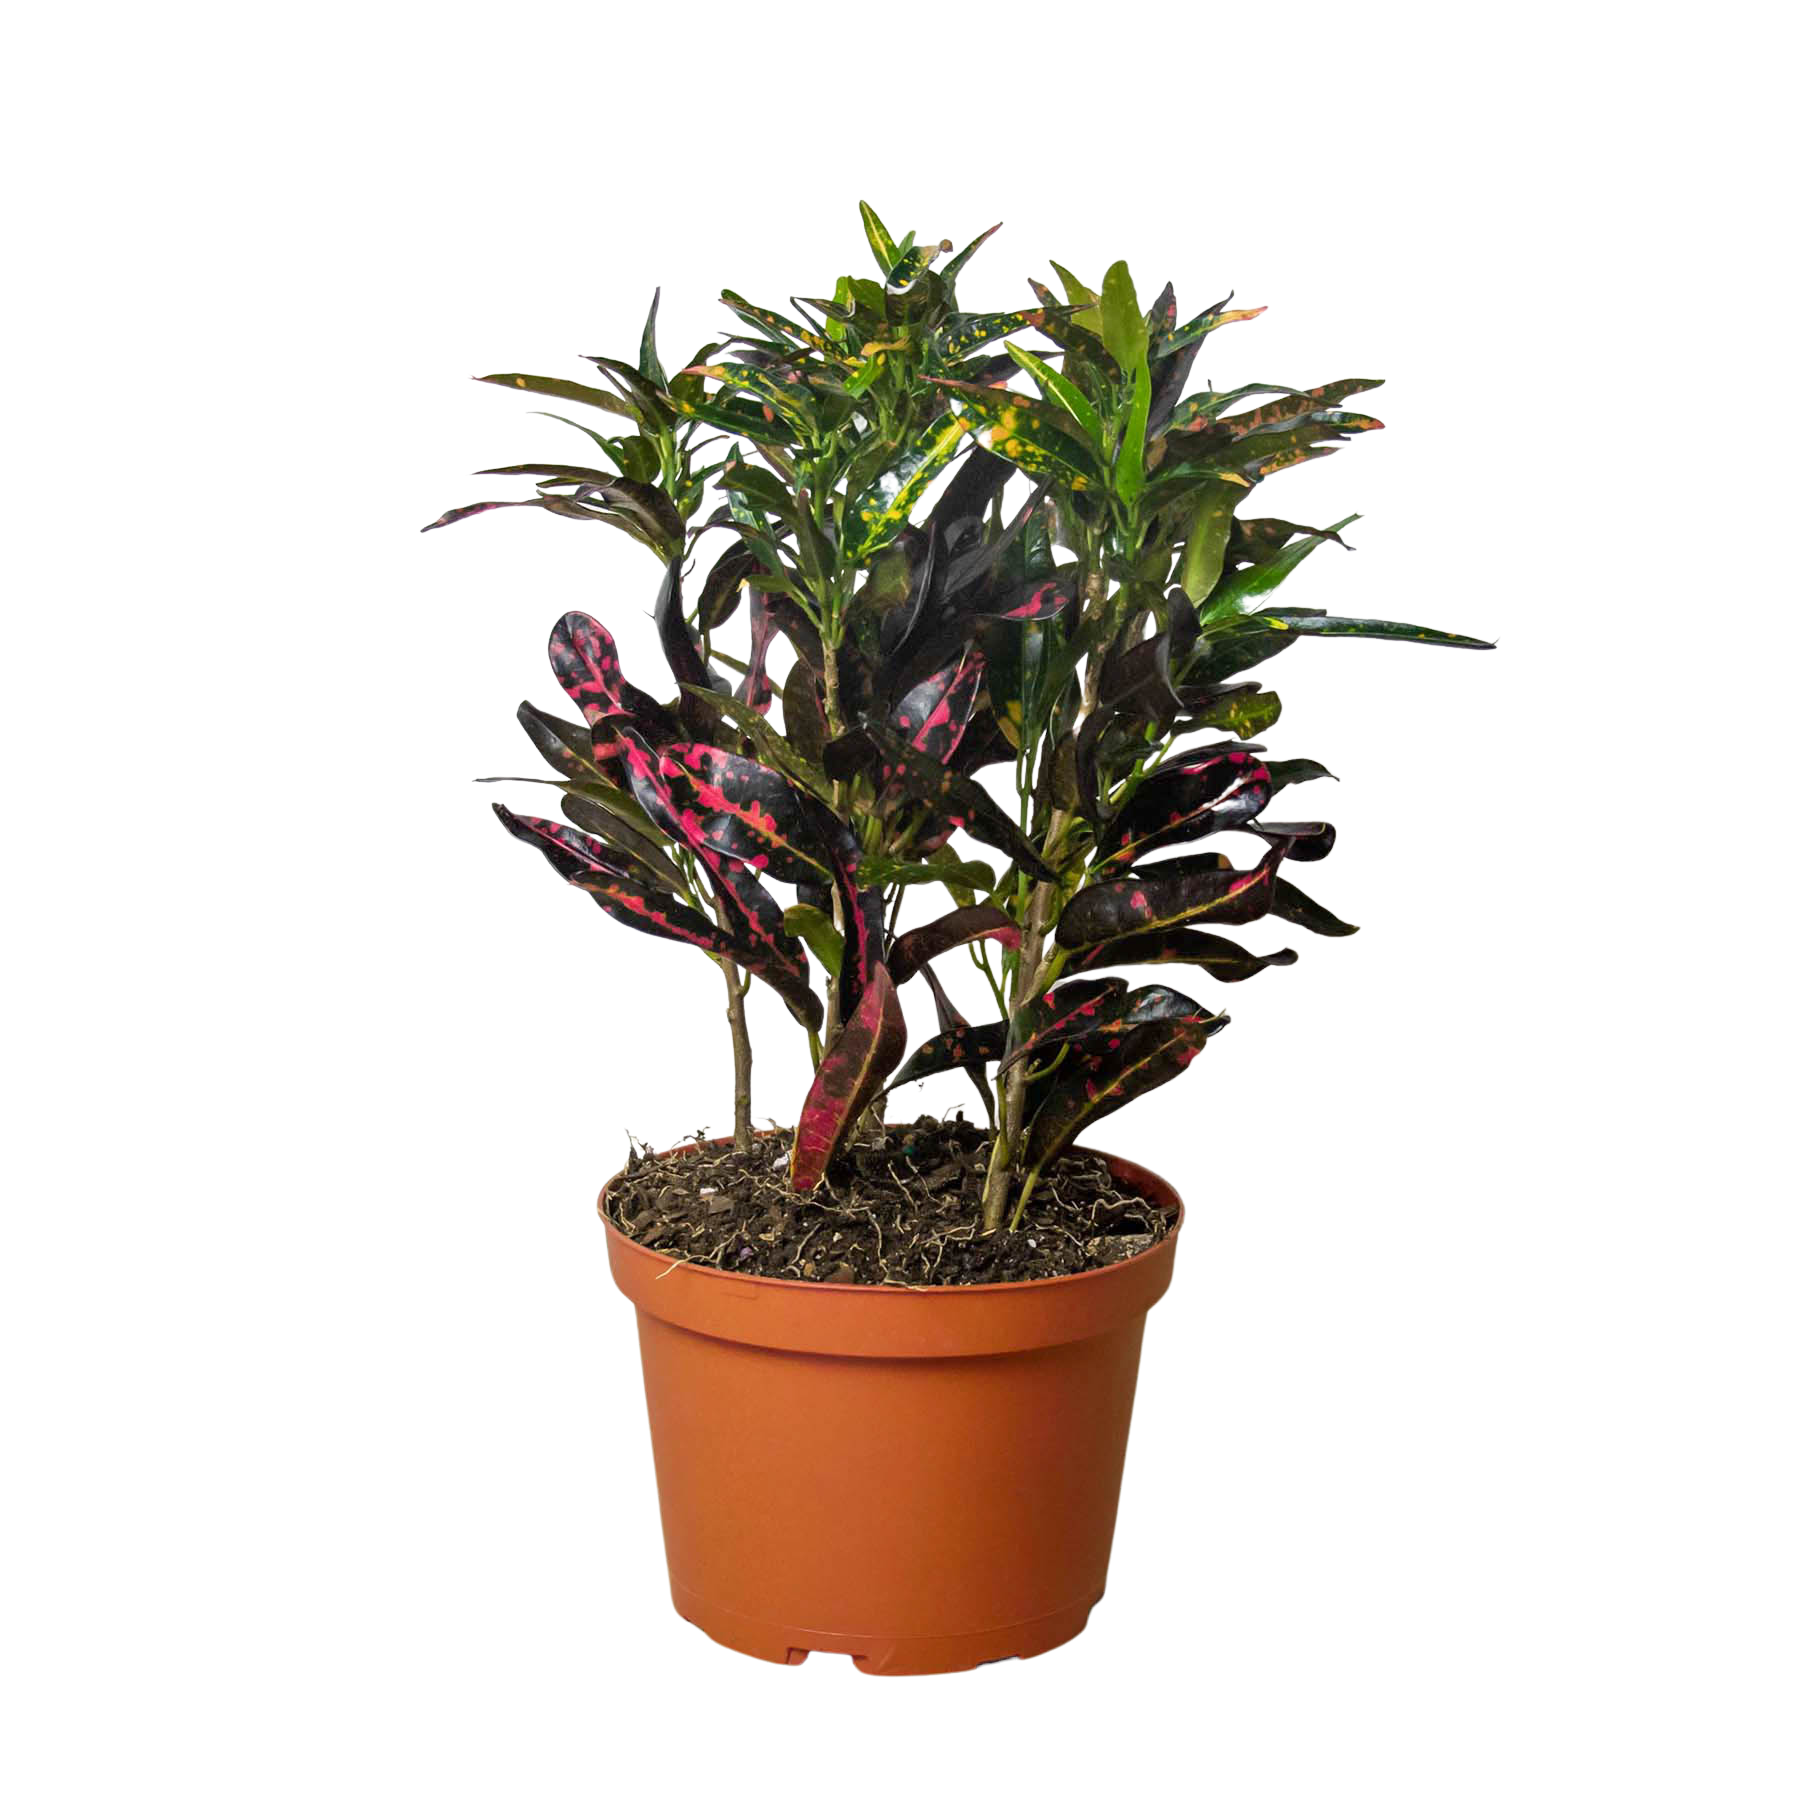 A plant with red and black leaves available at a top plant nursery near me.